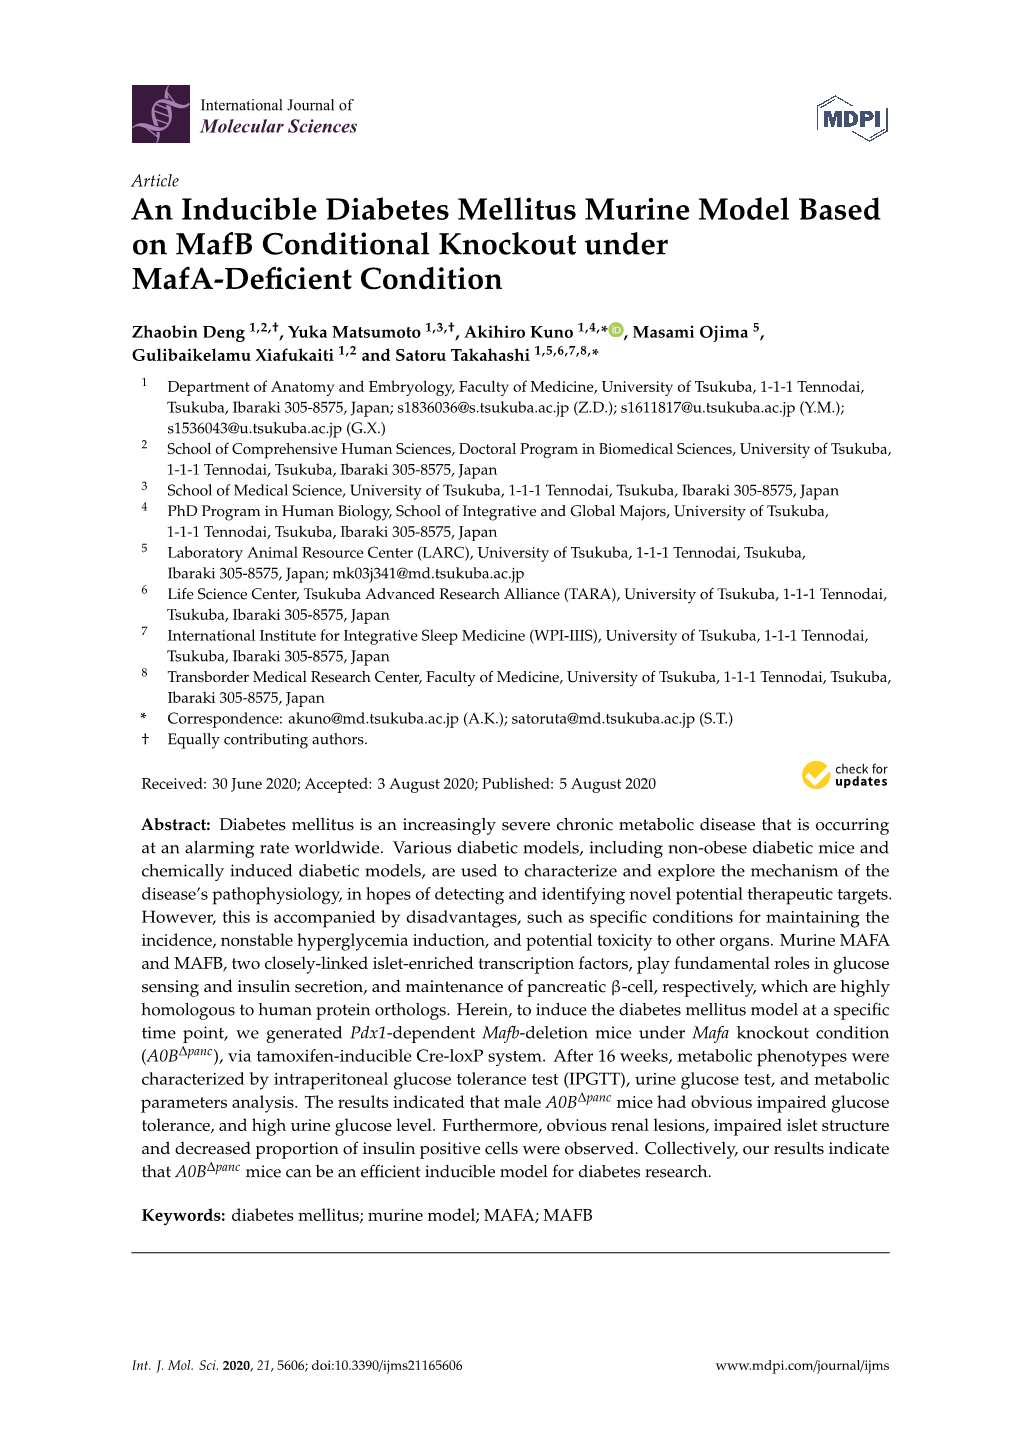 An Inducible Diabetes Mellitus Murine Model Based on Mafb Conditional Knockout Under Mafa-Deficient Condition